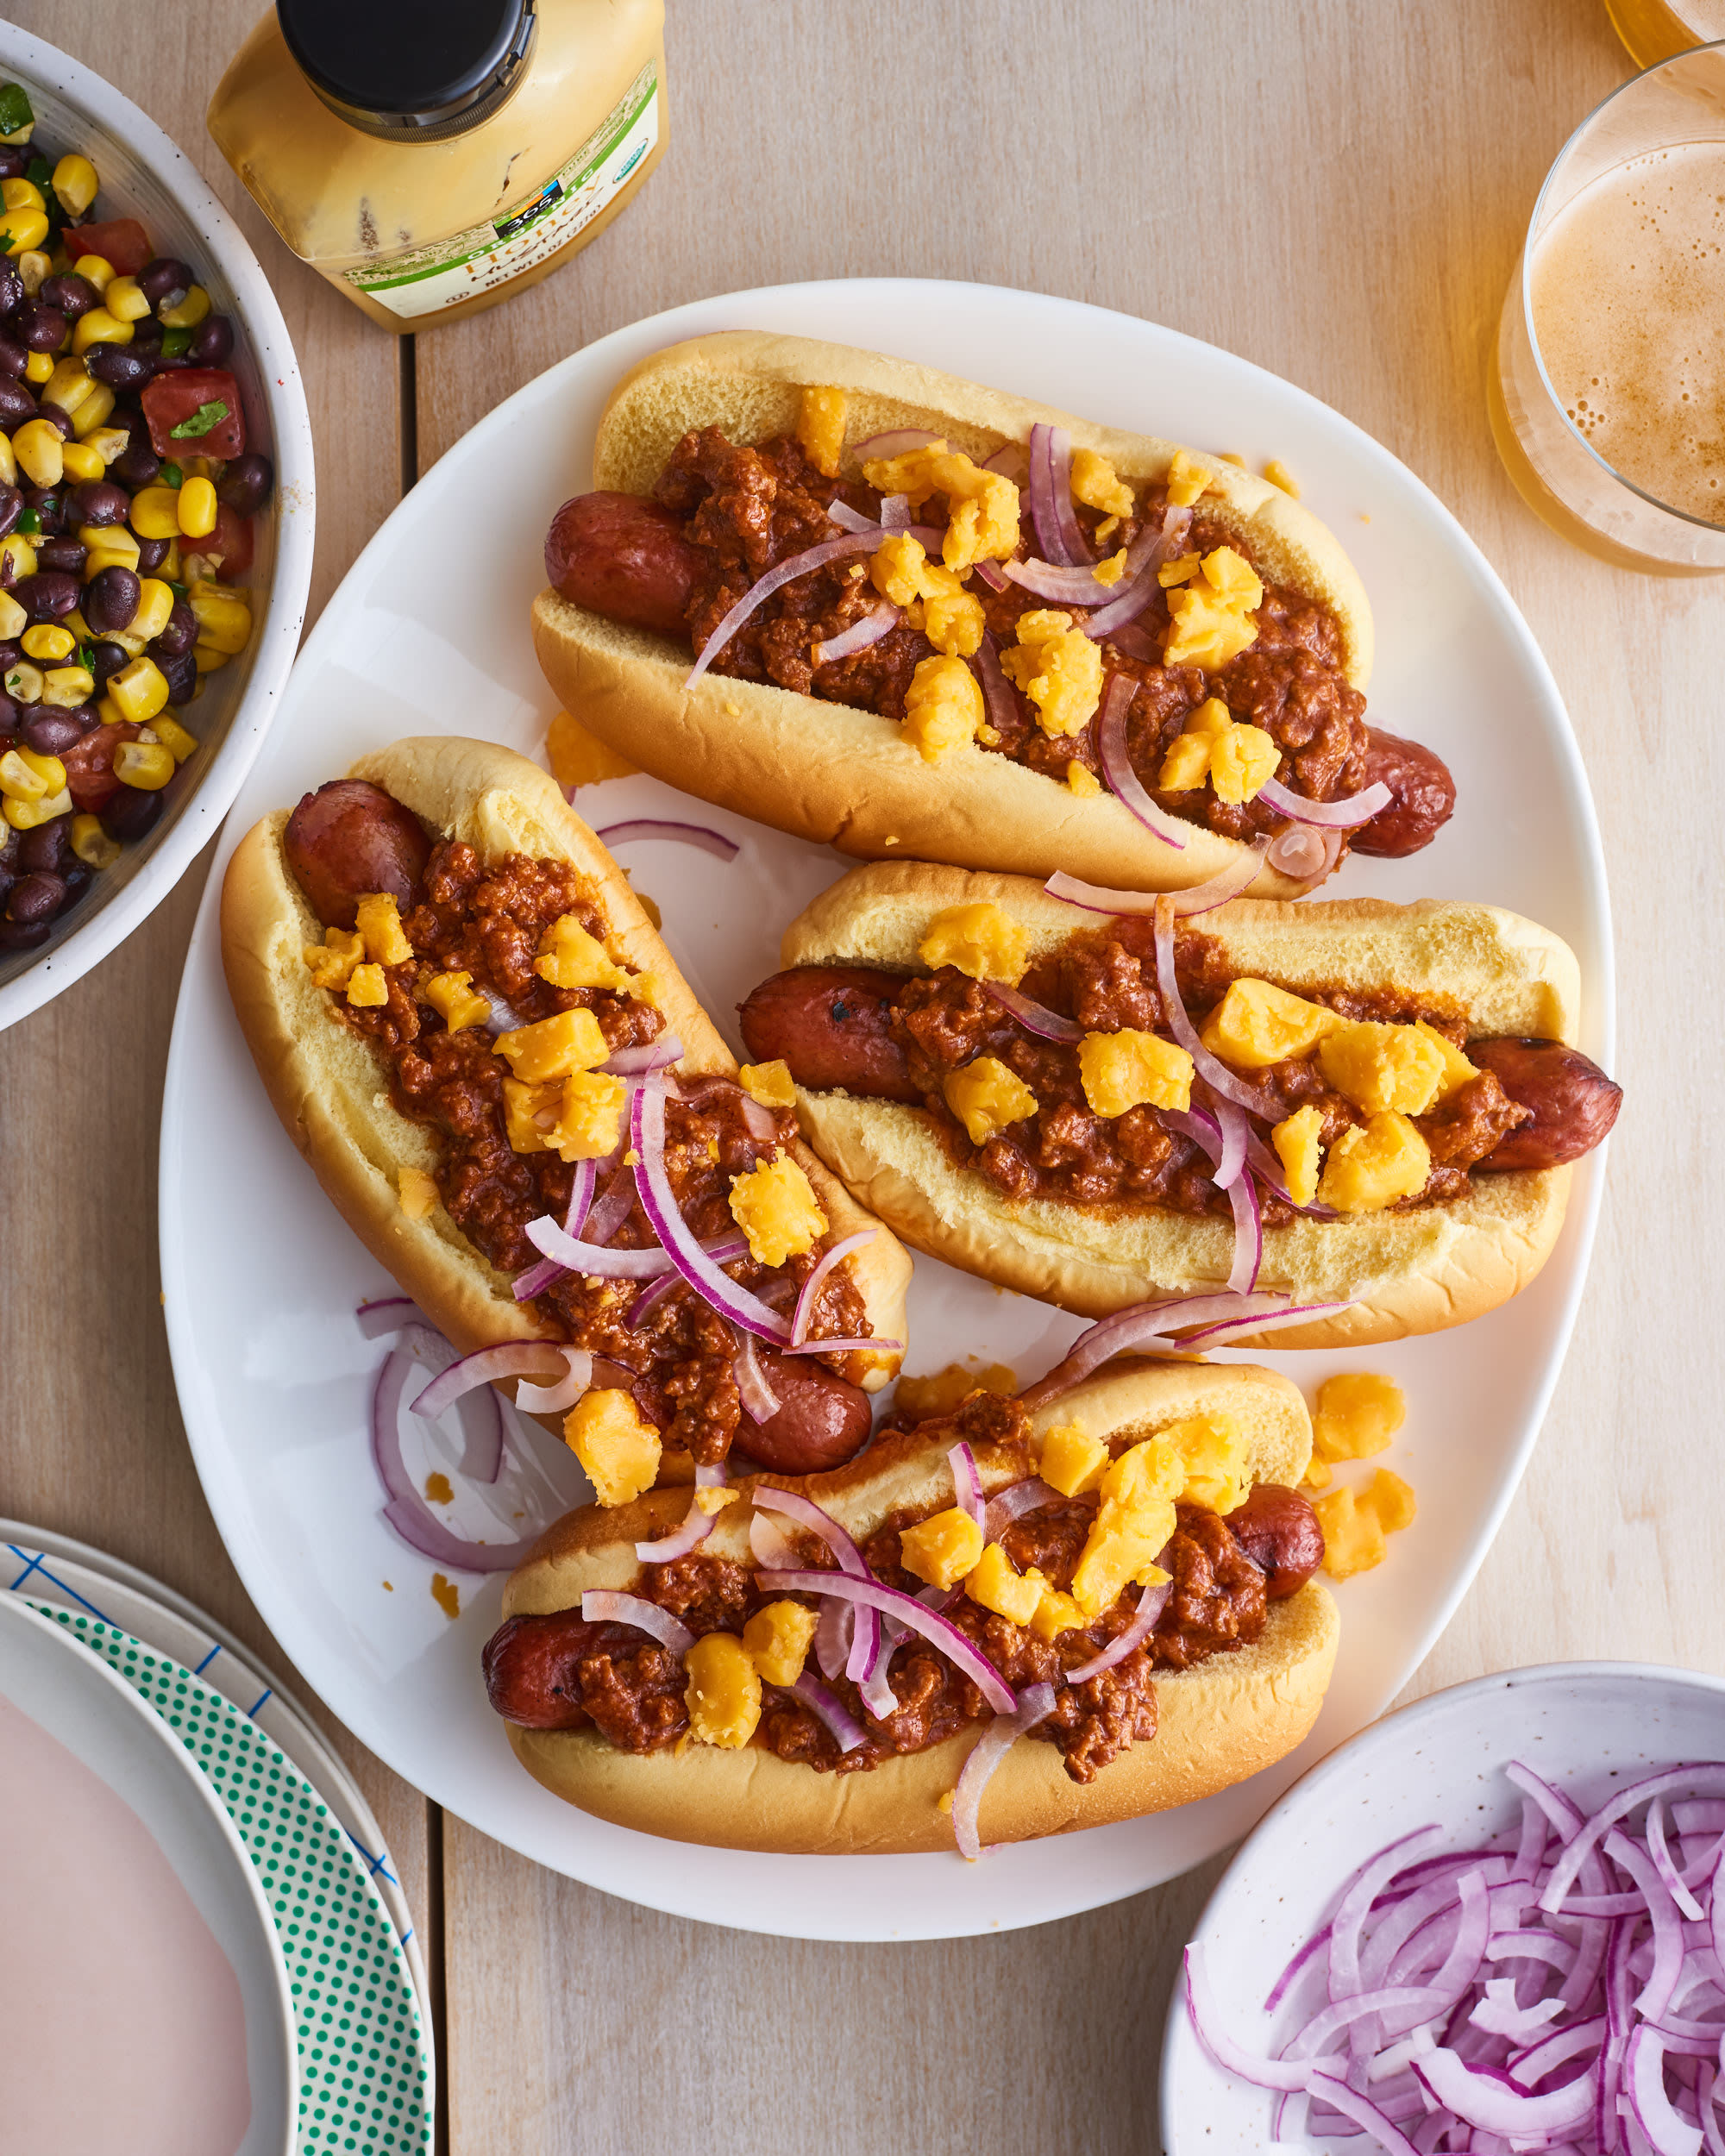 7 Hot Dogs To Make at Your Next Cookout - Smoked BBQ Source